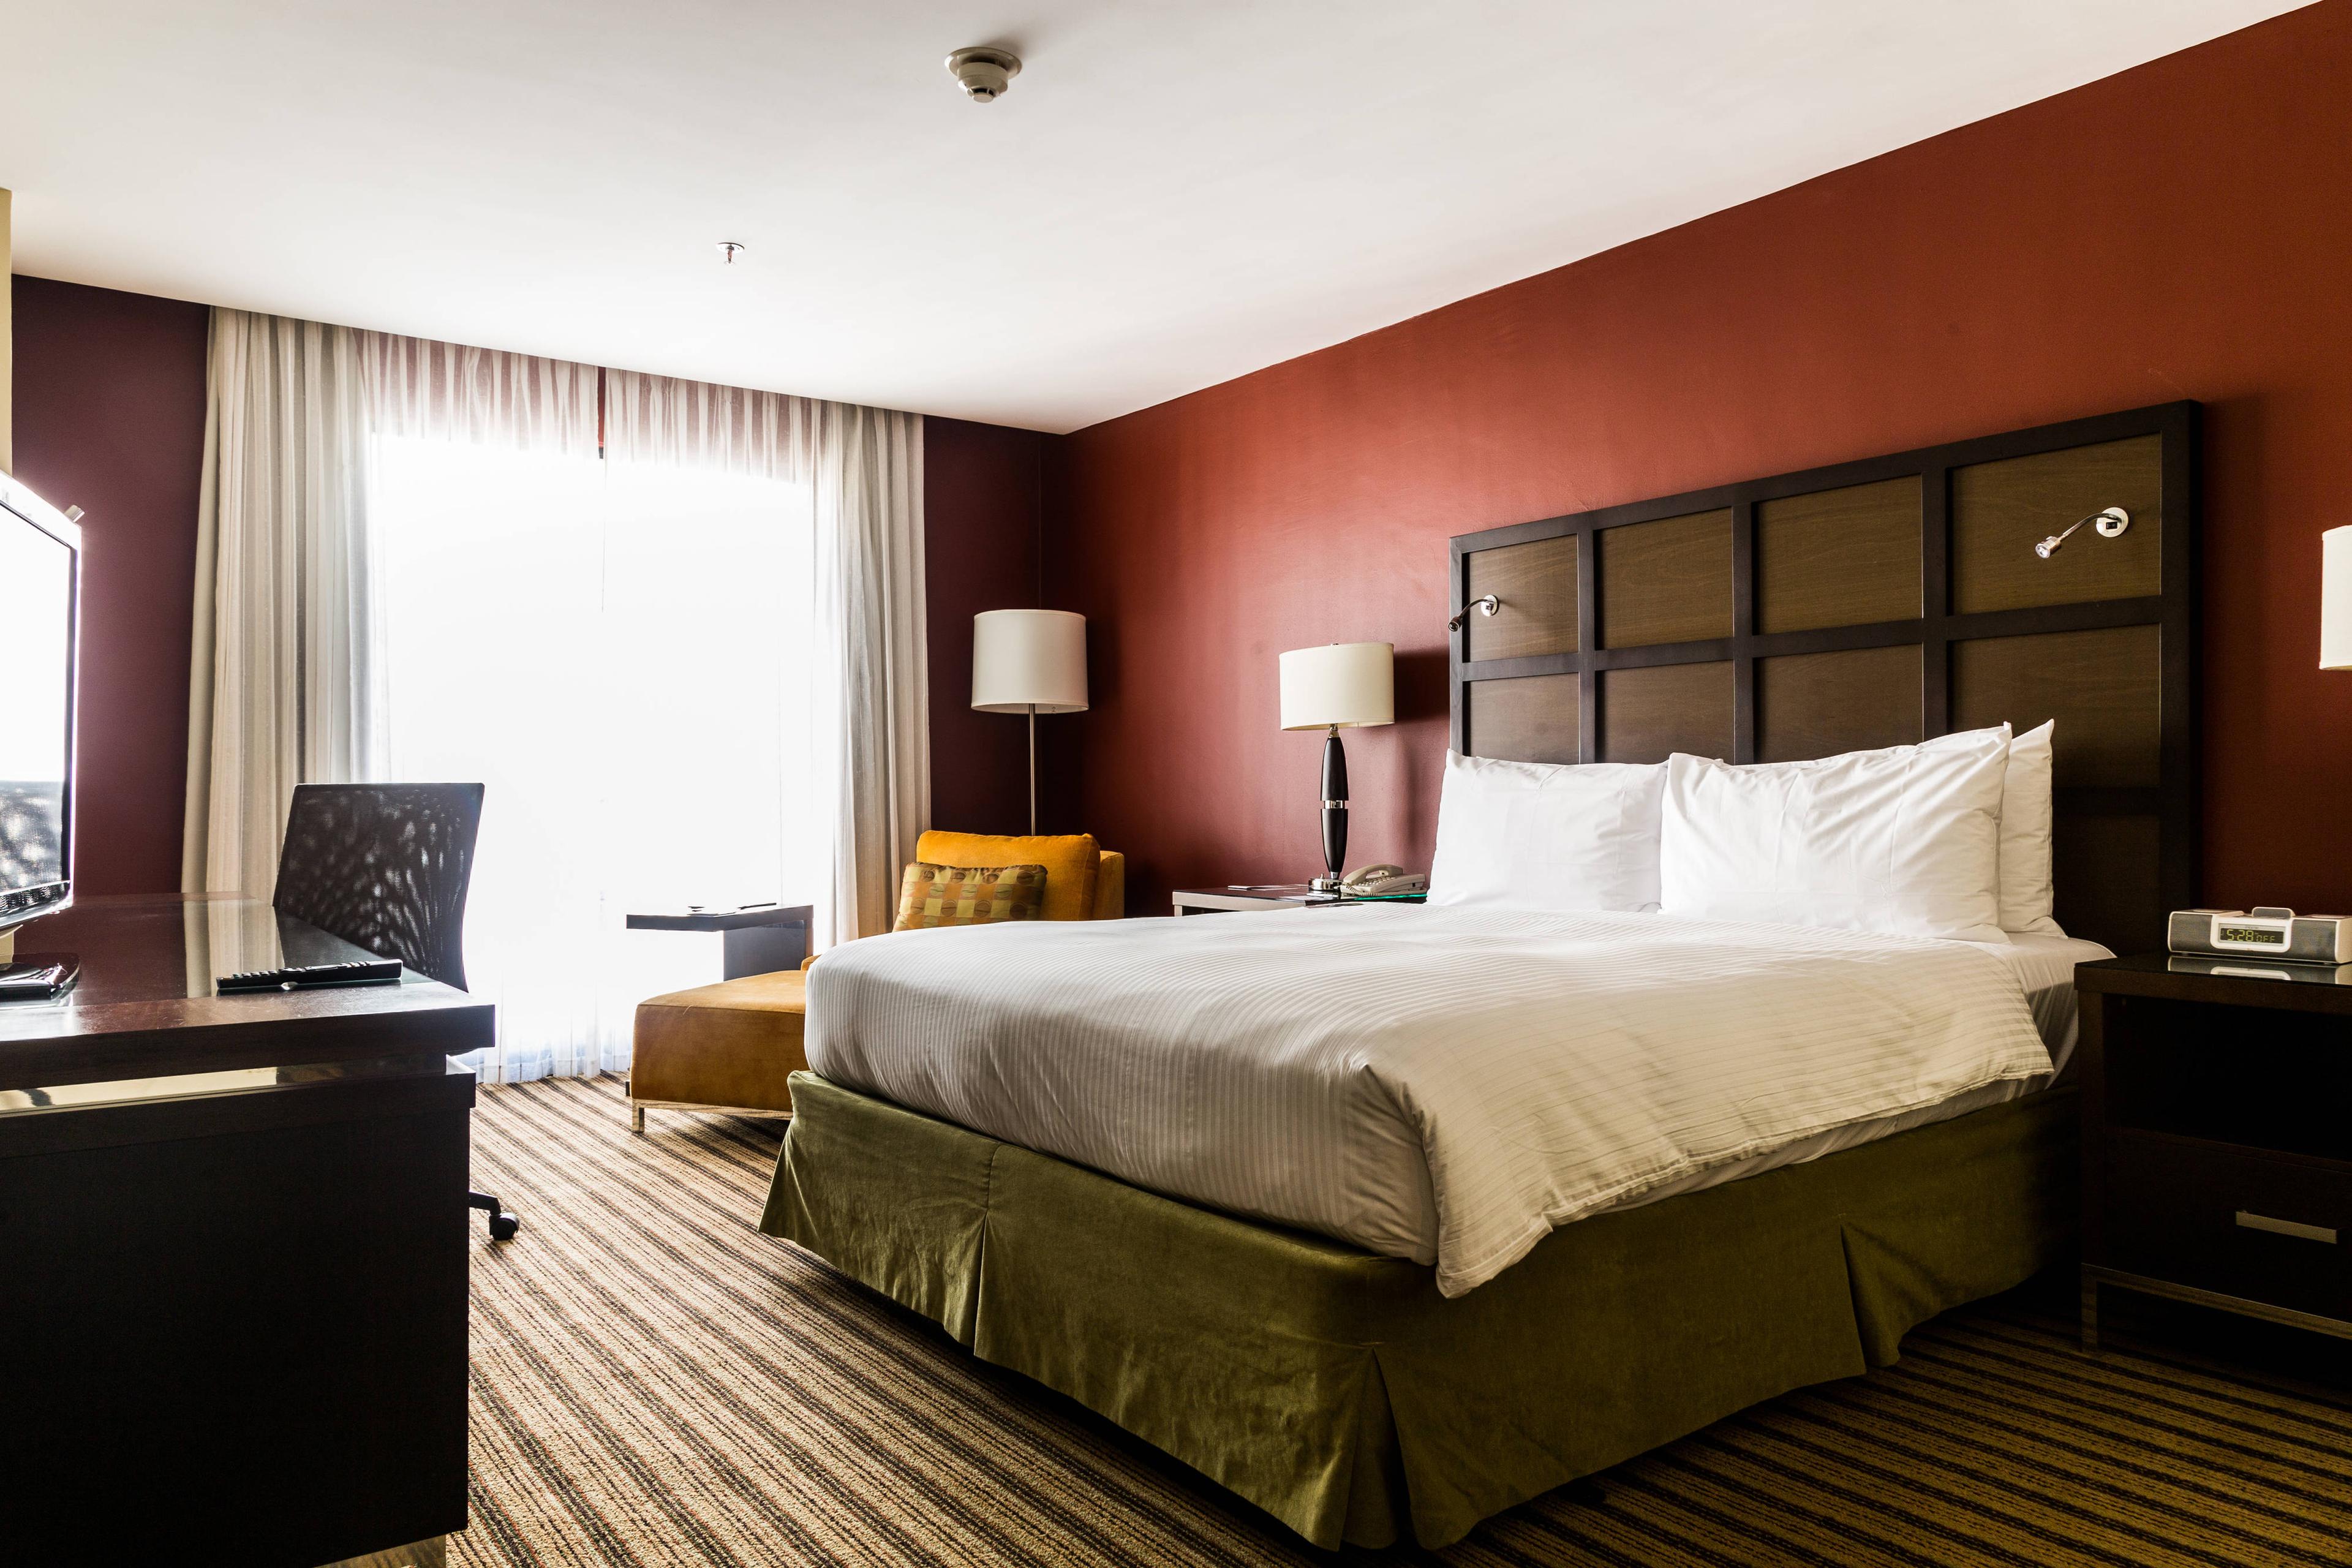 Discover the style and comfort in our spacious rooms with a king-size bed, ultra-luxurious bedding and pillows, a 42-inch LCD TV, iPod dock and high-speed Internet access.